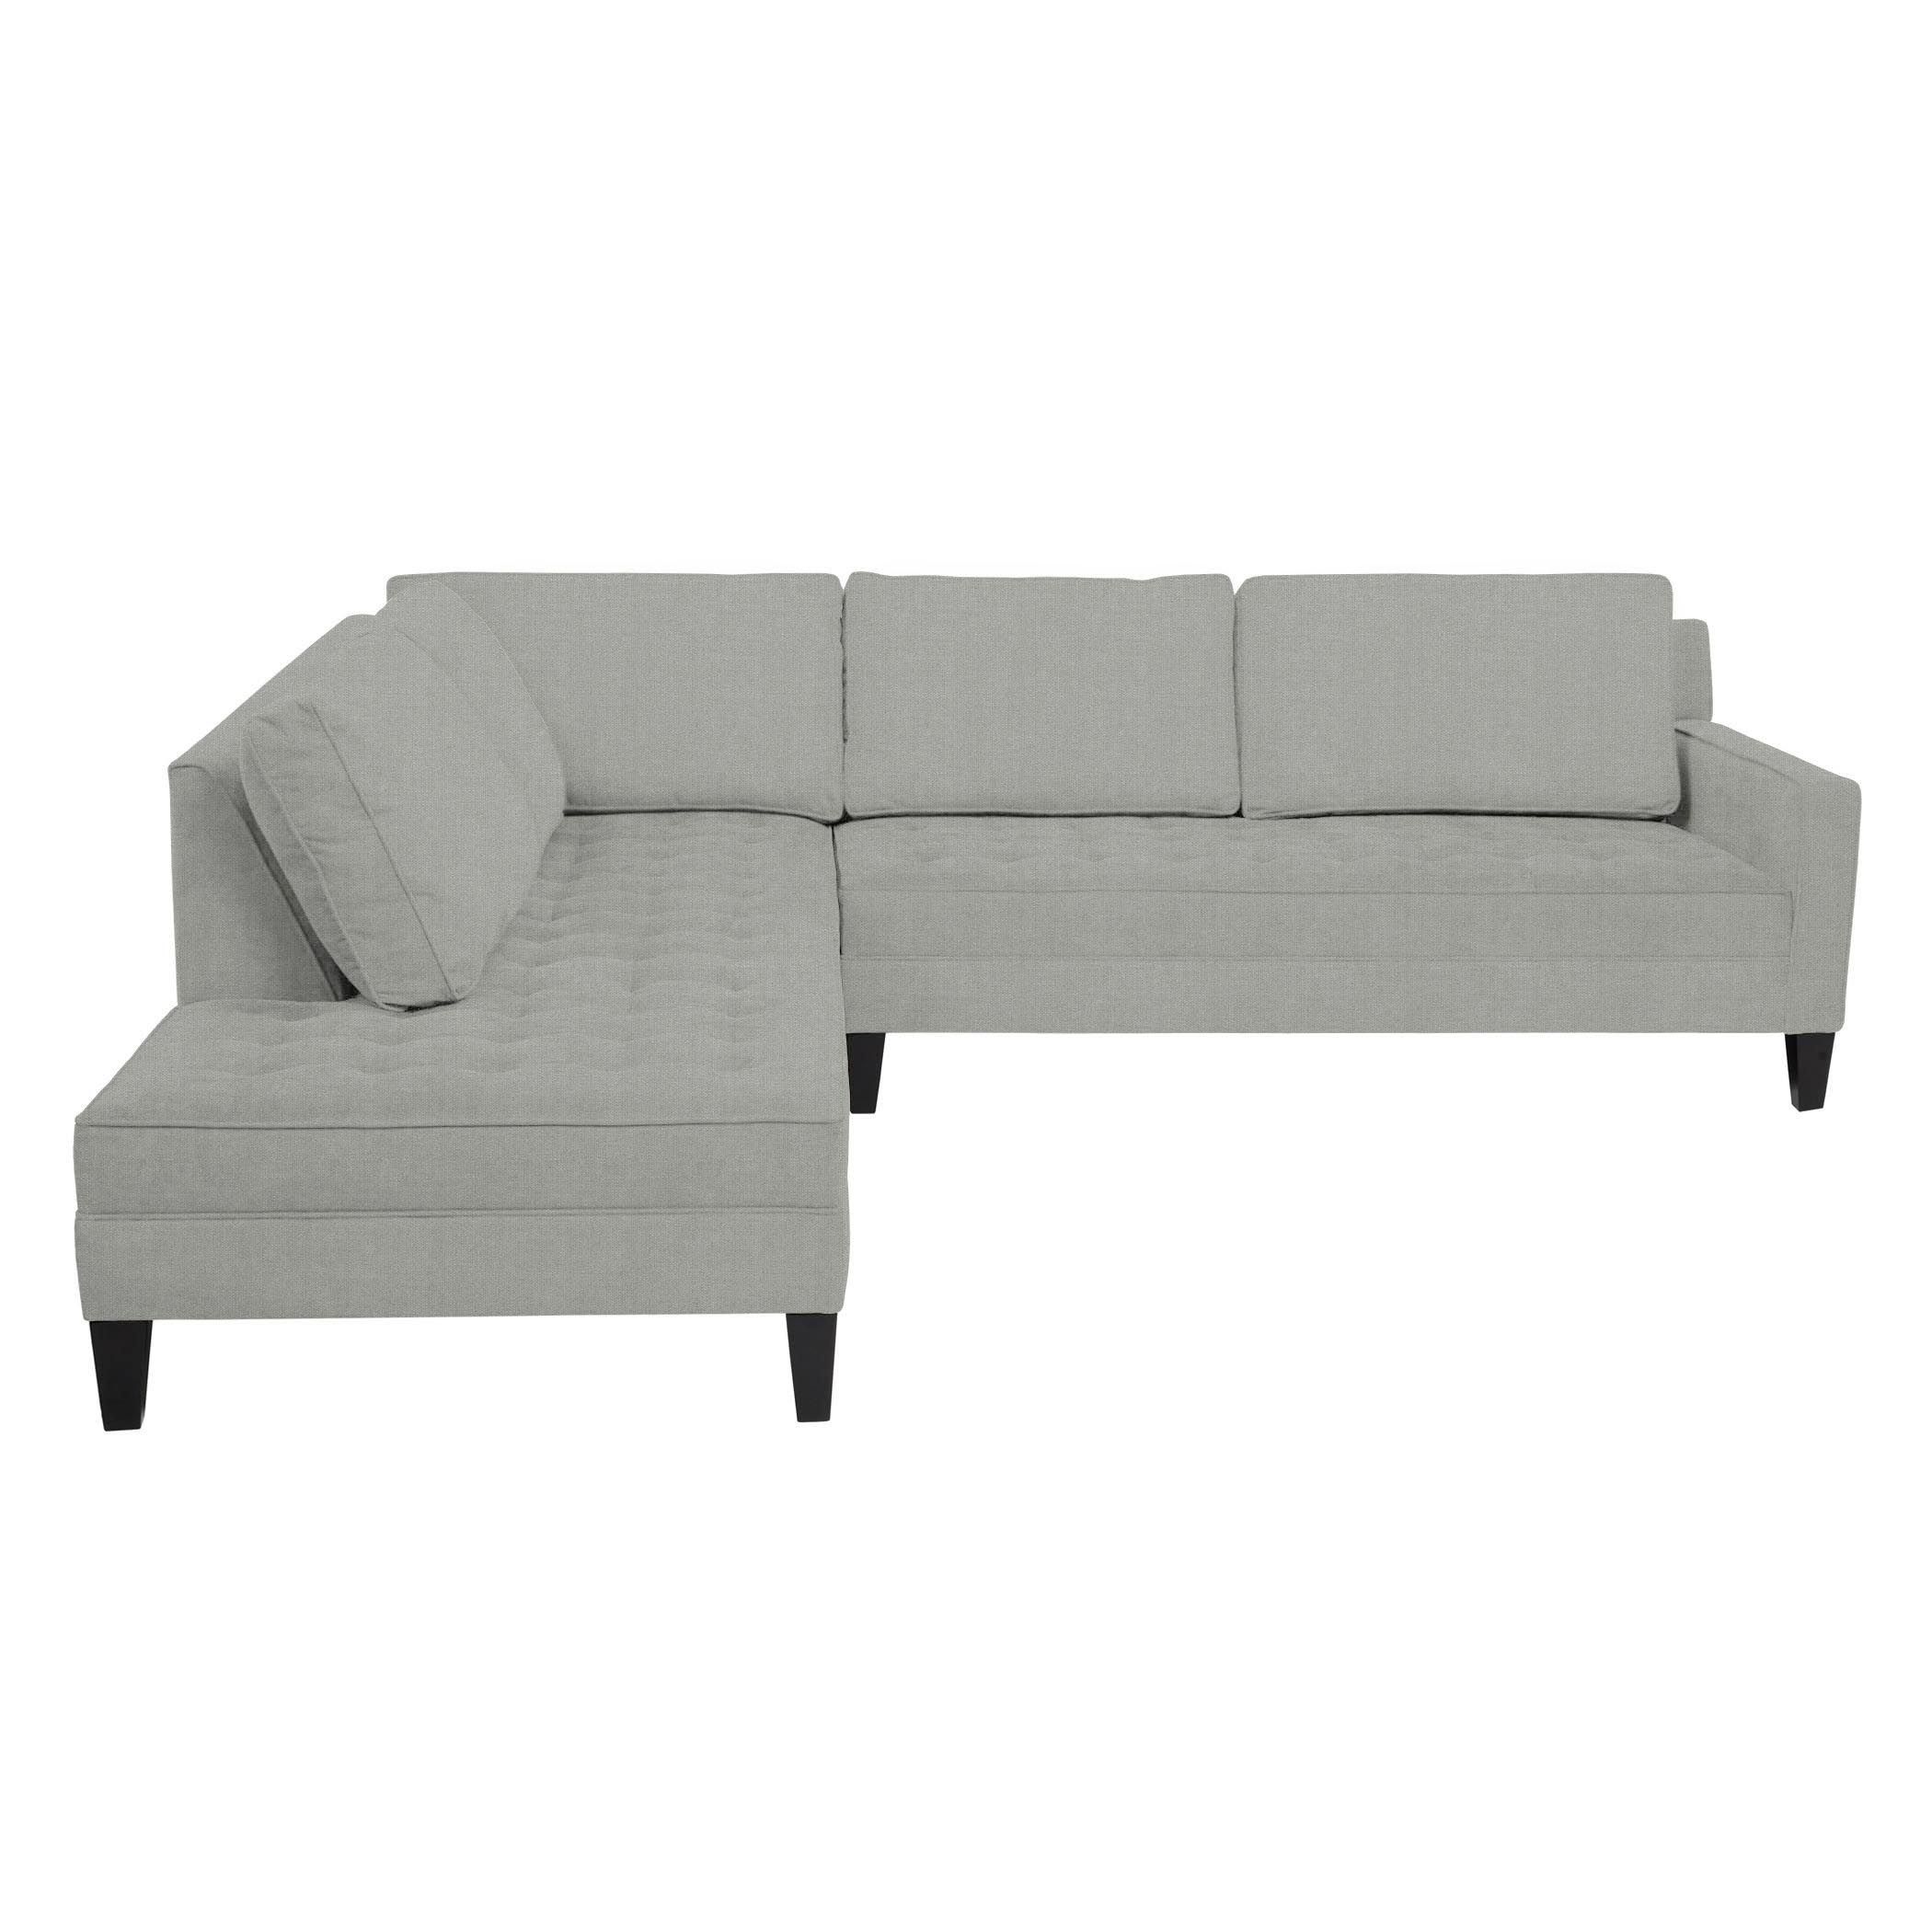 Vapor Daybed Sectional - 2 PC | Z Gallerie